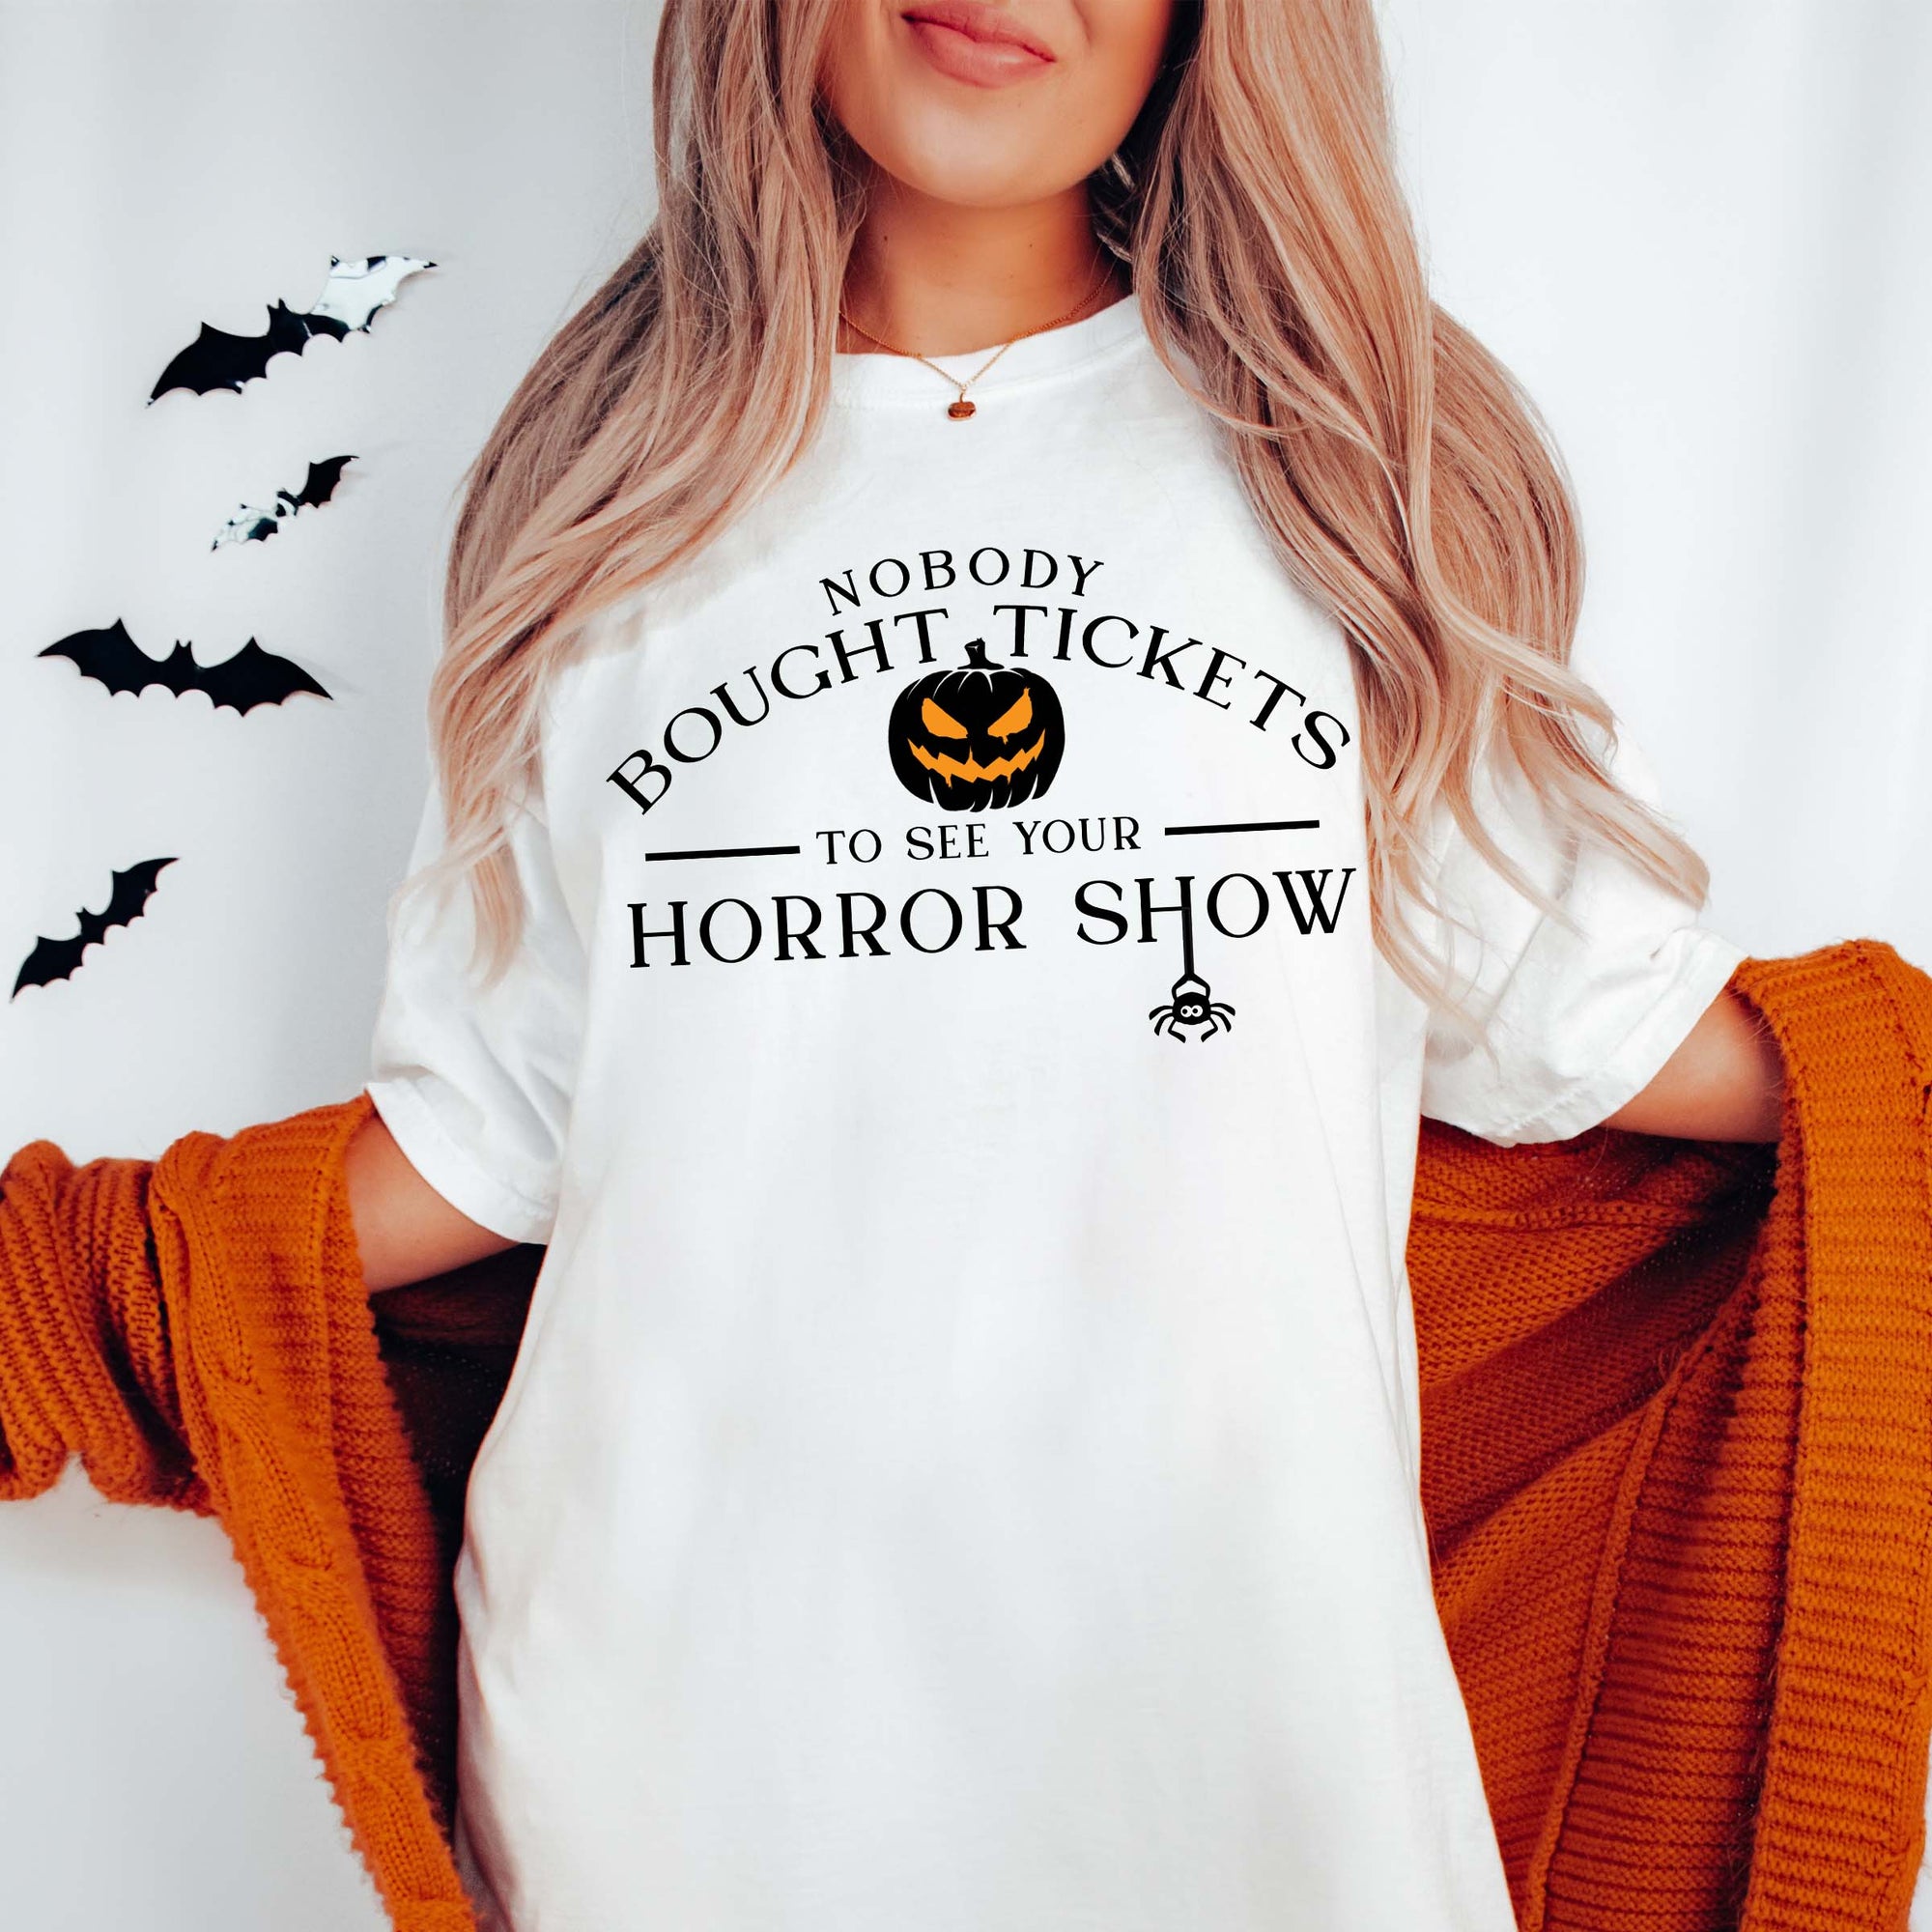 Tickets to your Horror Show Comfort Colors Tee